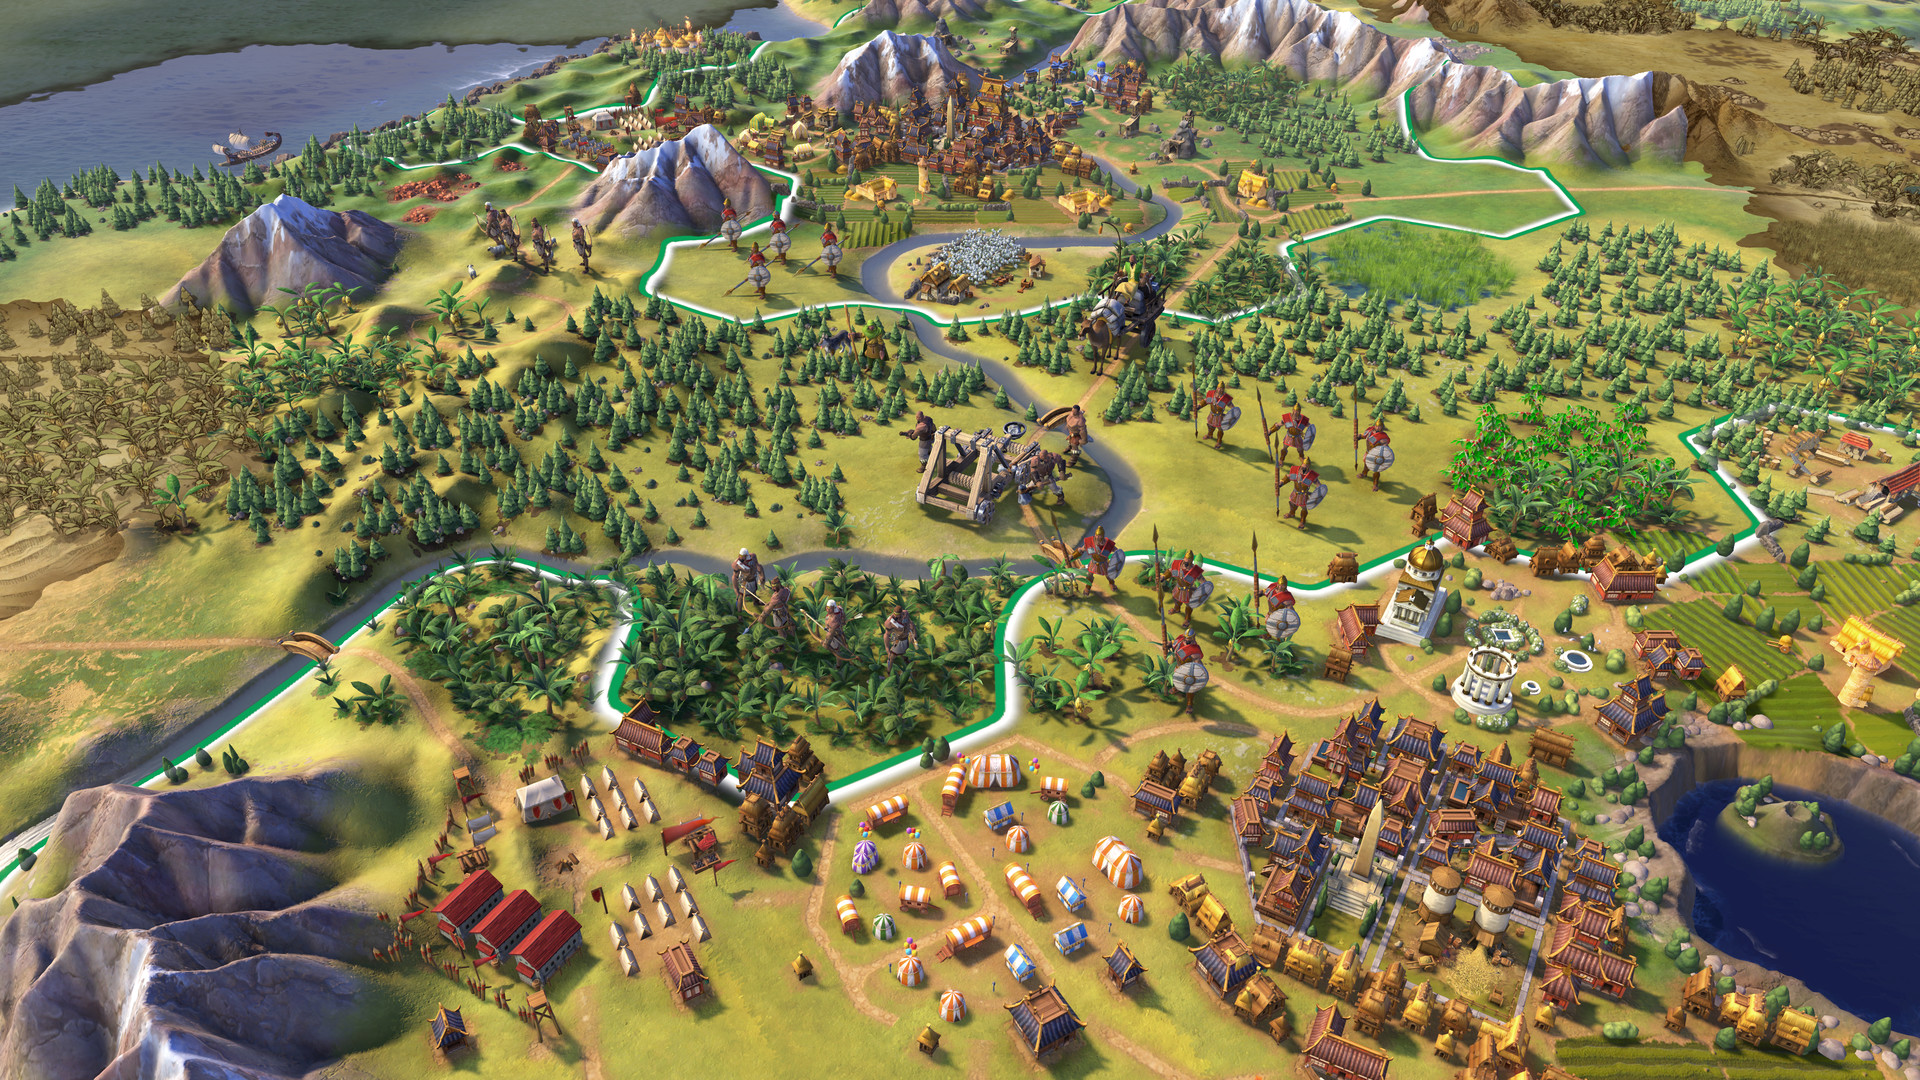 Best mobile strategy games: Civilization VI. Image shows a settlement being set up in sprawling hills.